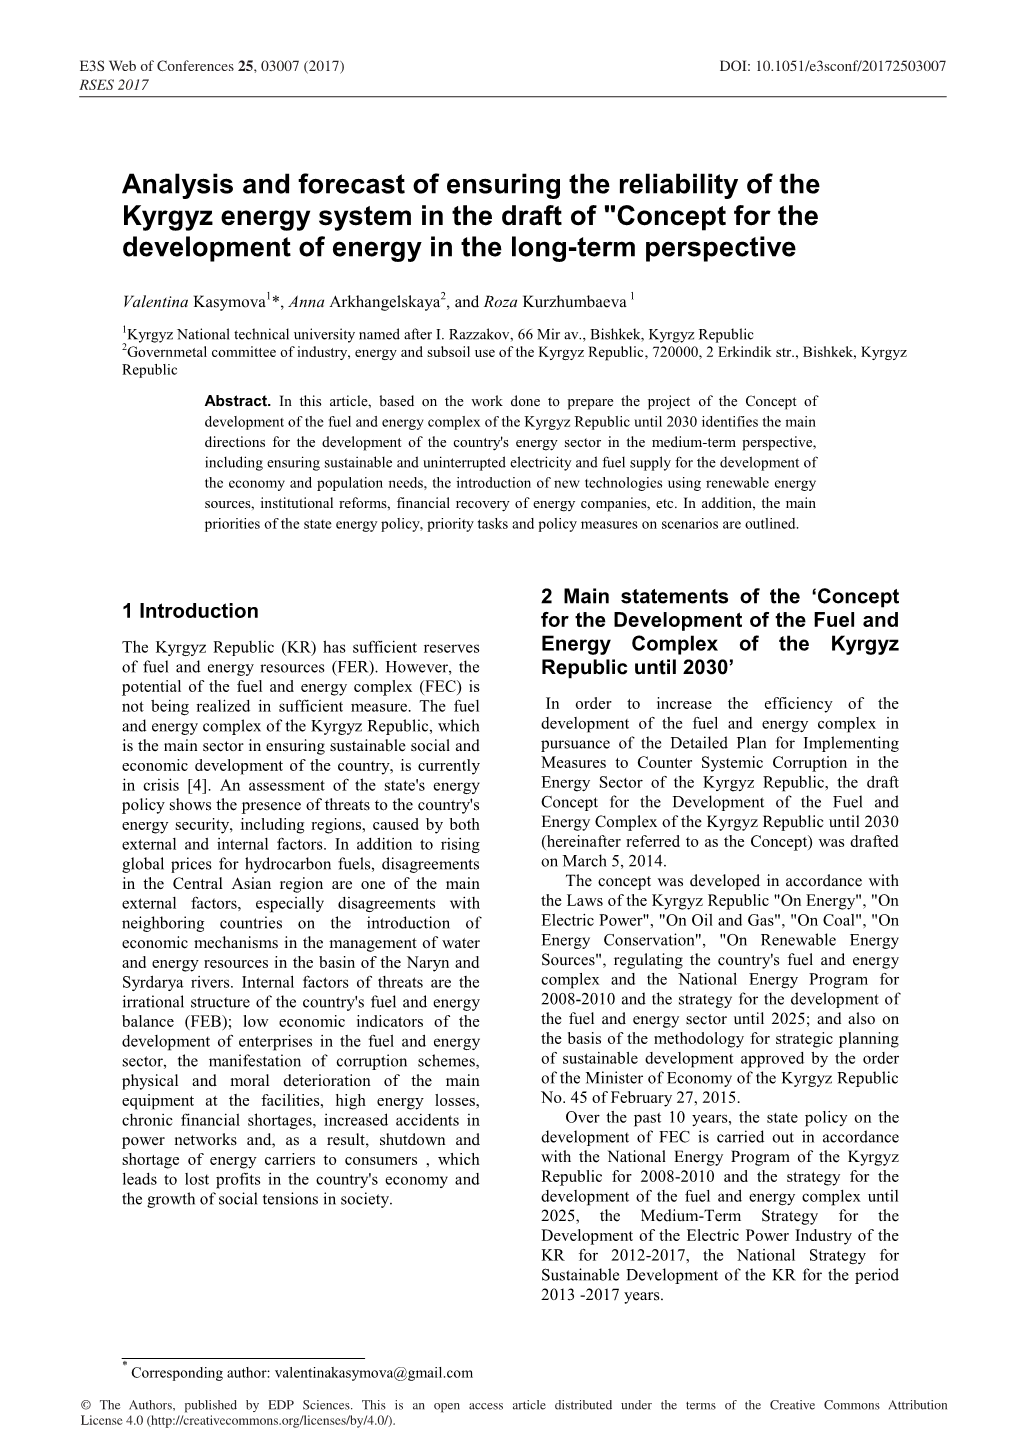 Analysis and Forecast of Ensuring the Reliability of the Kyrgyz Energy System in the Draft of "Concept for the Development of Energy in the Long-Term Perspective